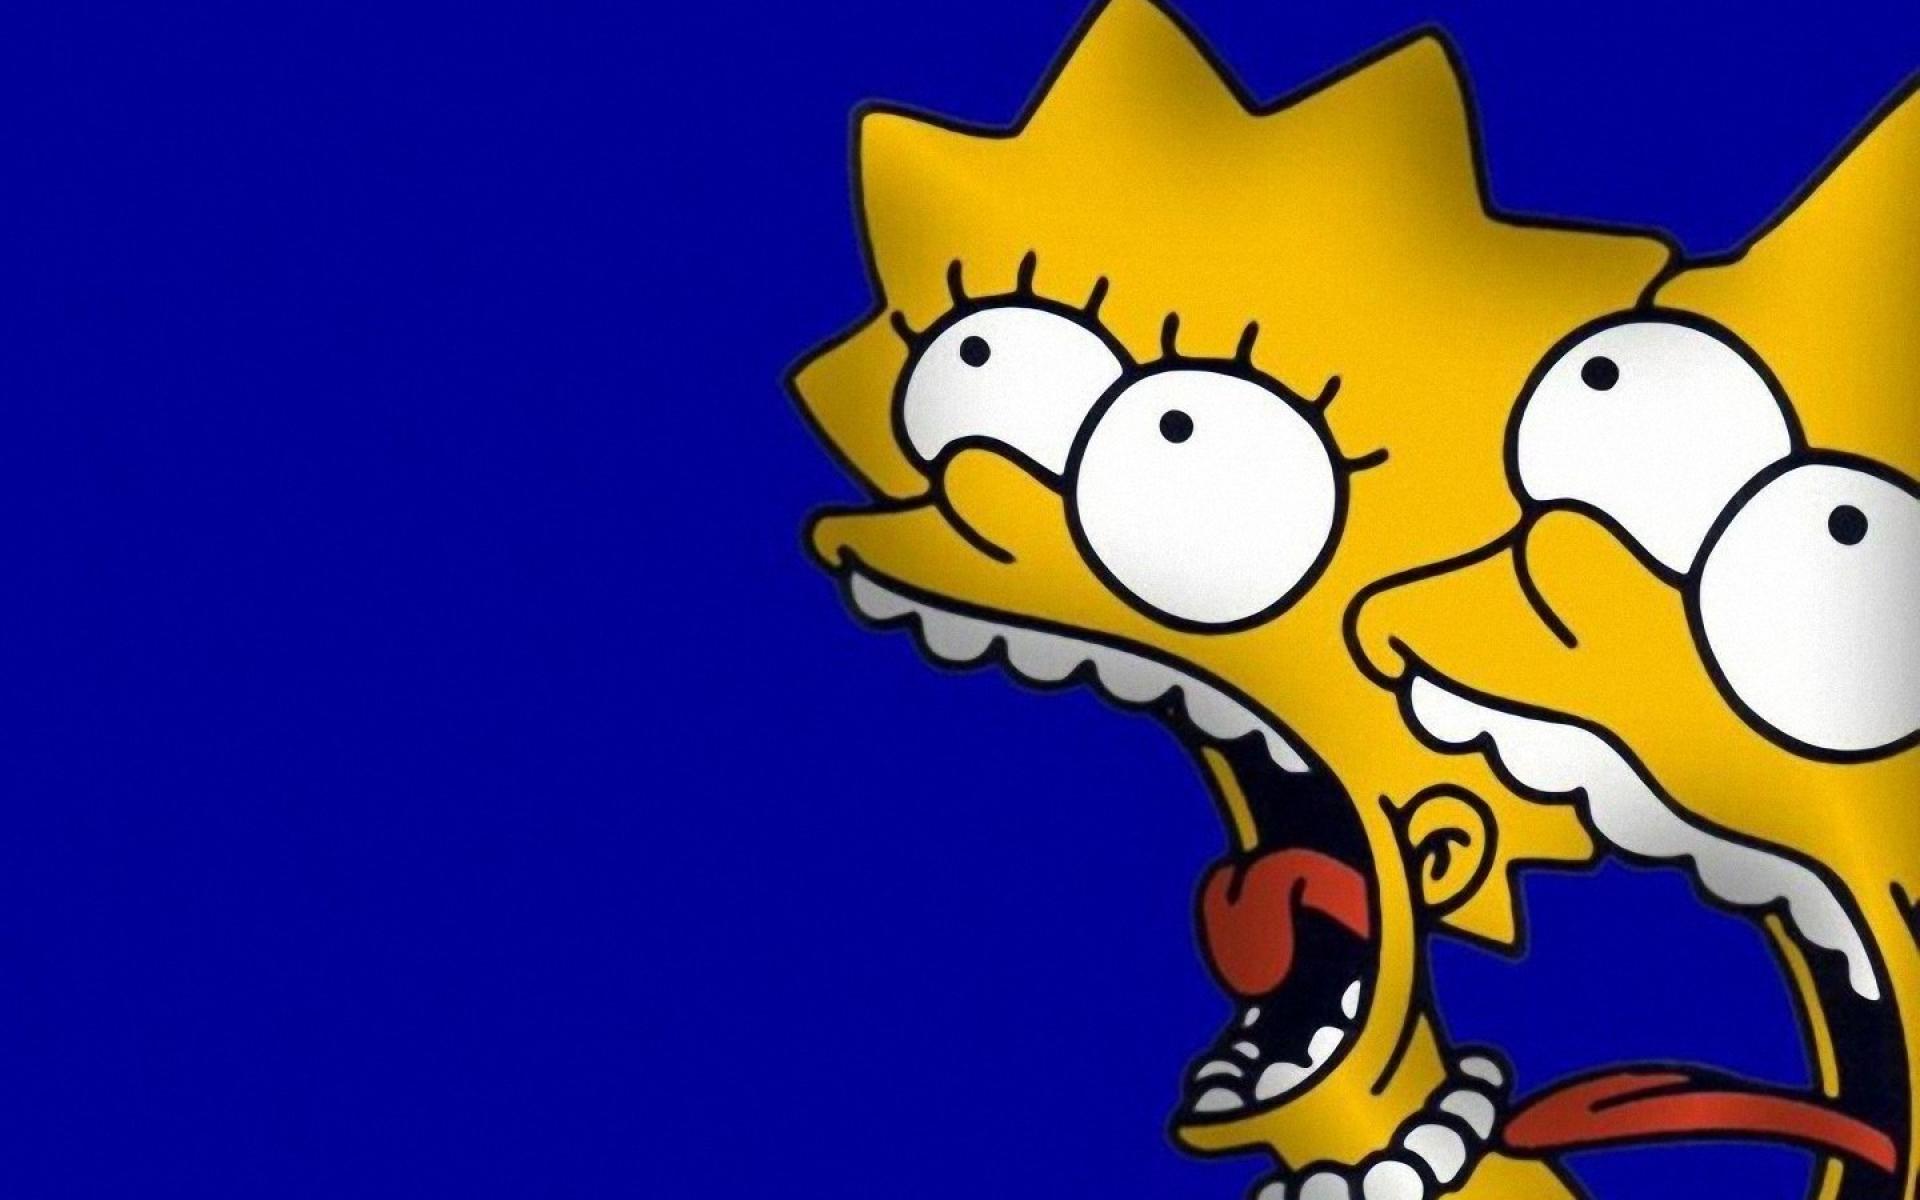 The Simpsons Wallpaper   Wallpaper High Definition High Quality 1920x1200